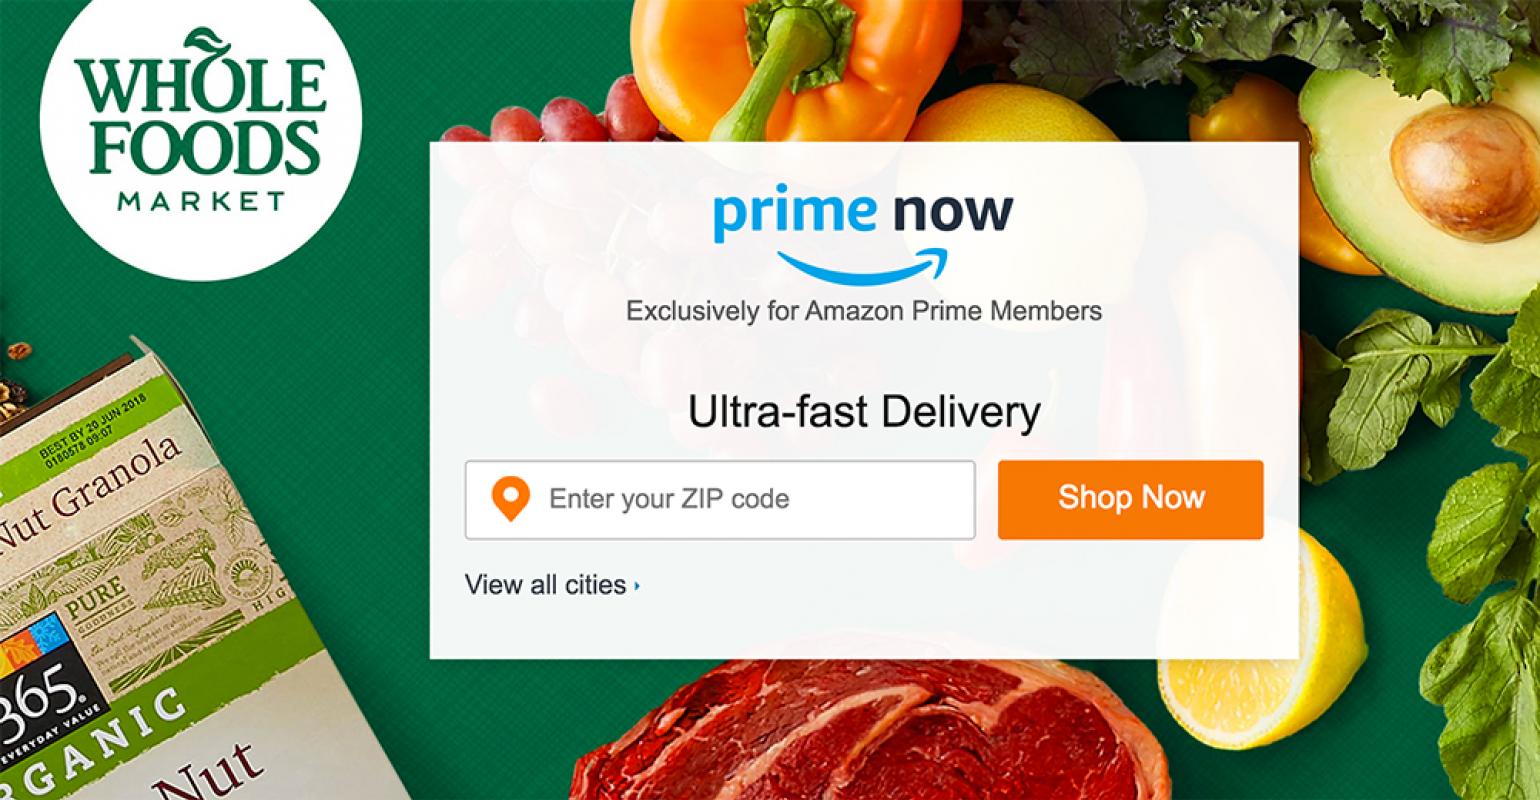 offering delivery from Whole Foods through Prime Now